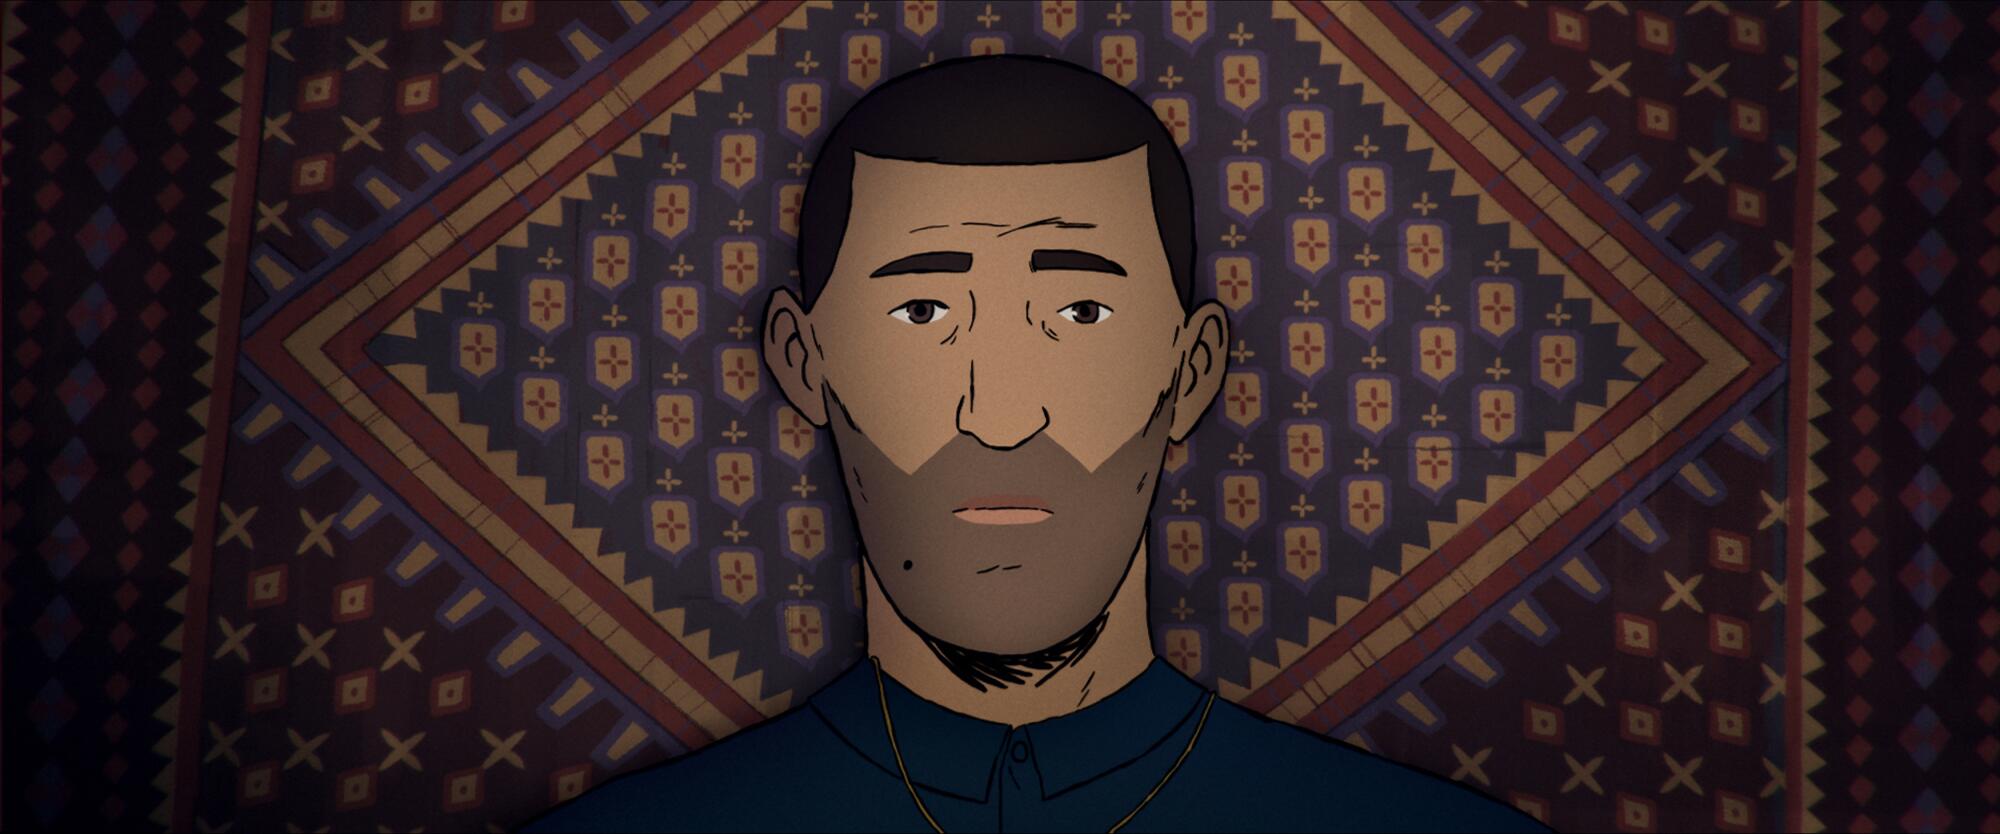 The character Amin in the animated documentary, "Flee"